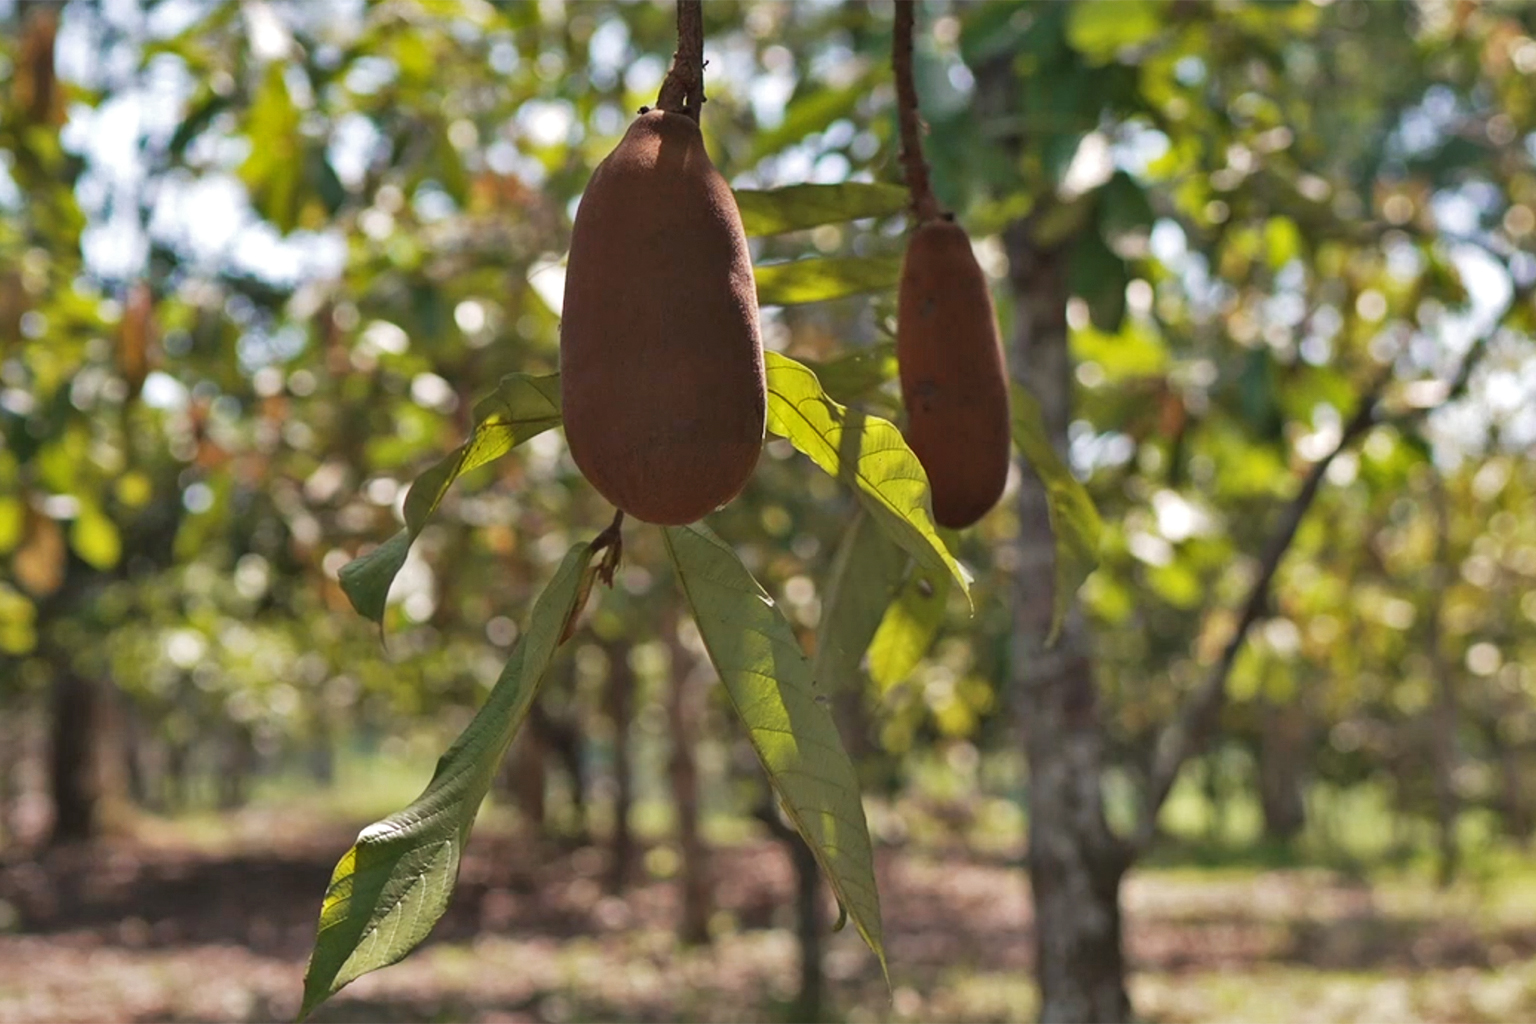 A cupuaçu fruit hanging from a tree.